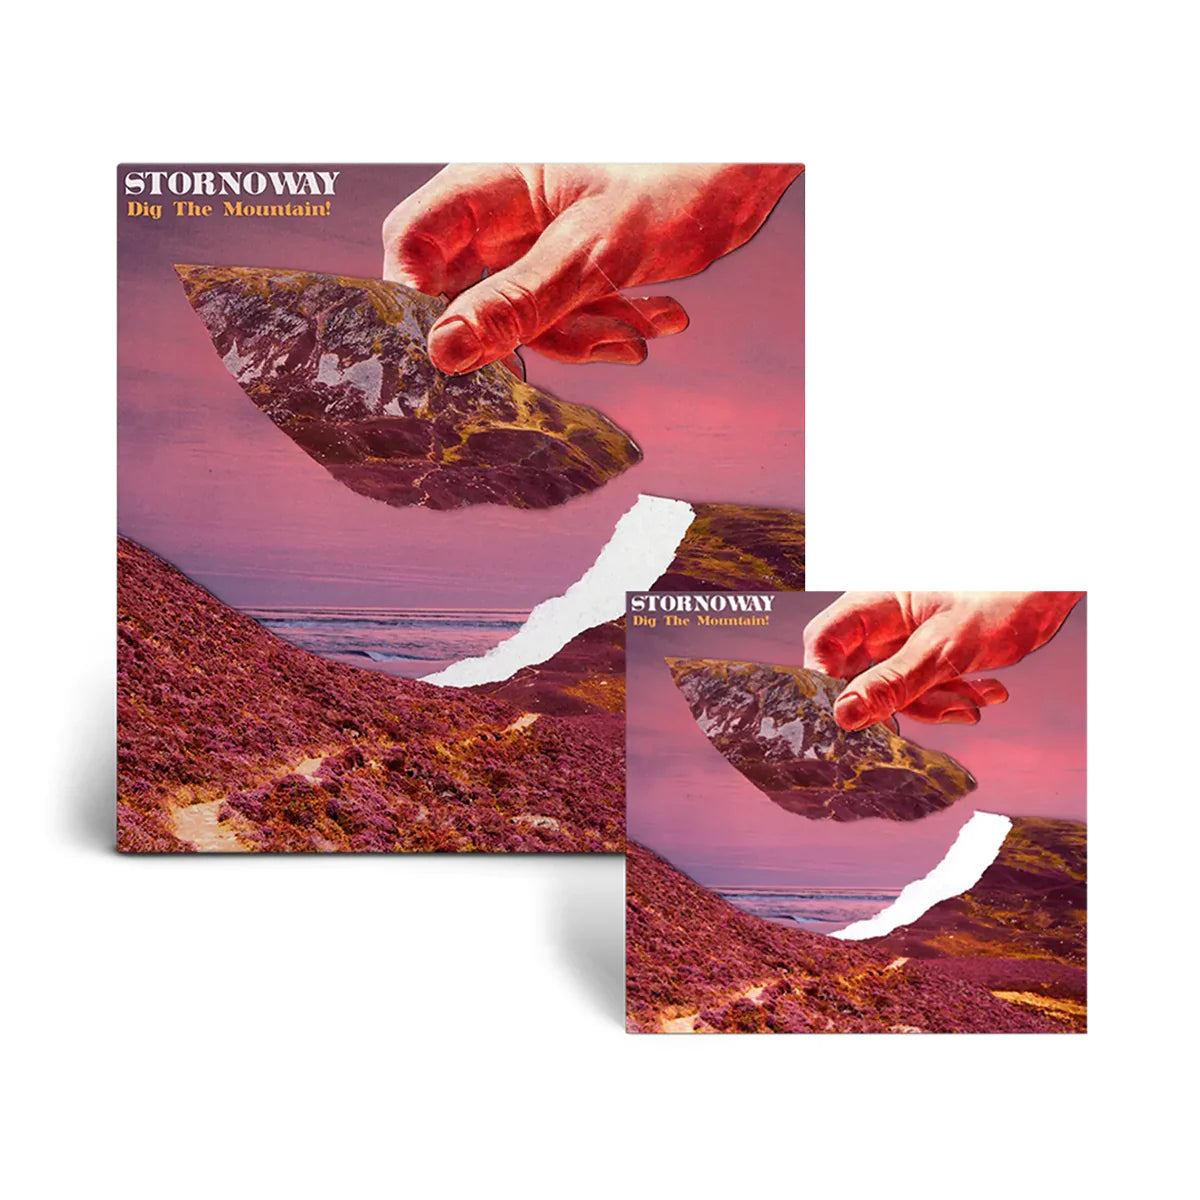 Dig The Mountain! Eco-Mix Vinyl LP + Signed Print